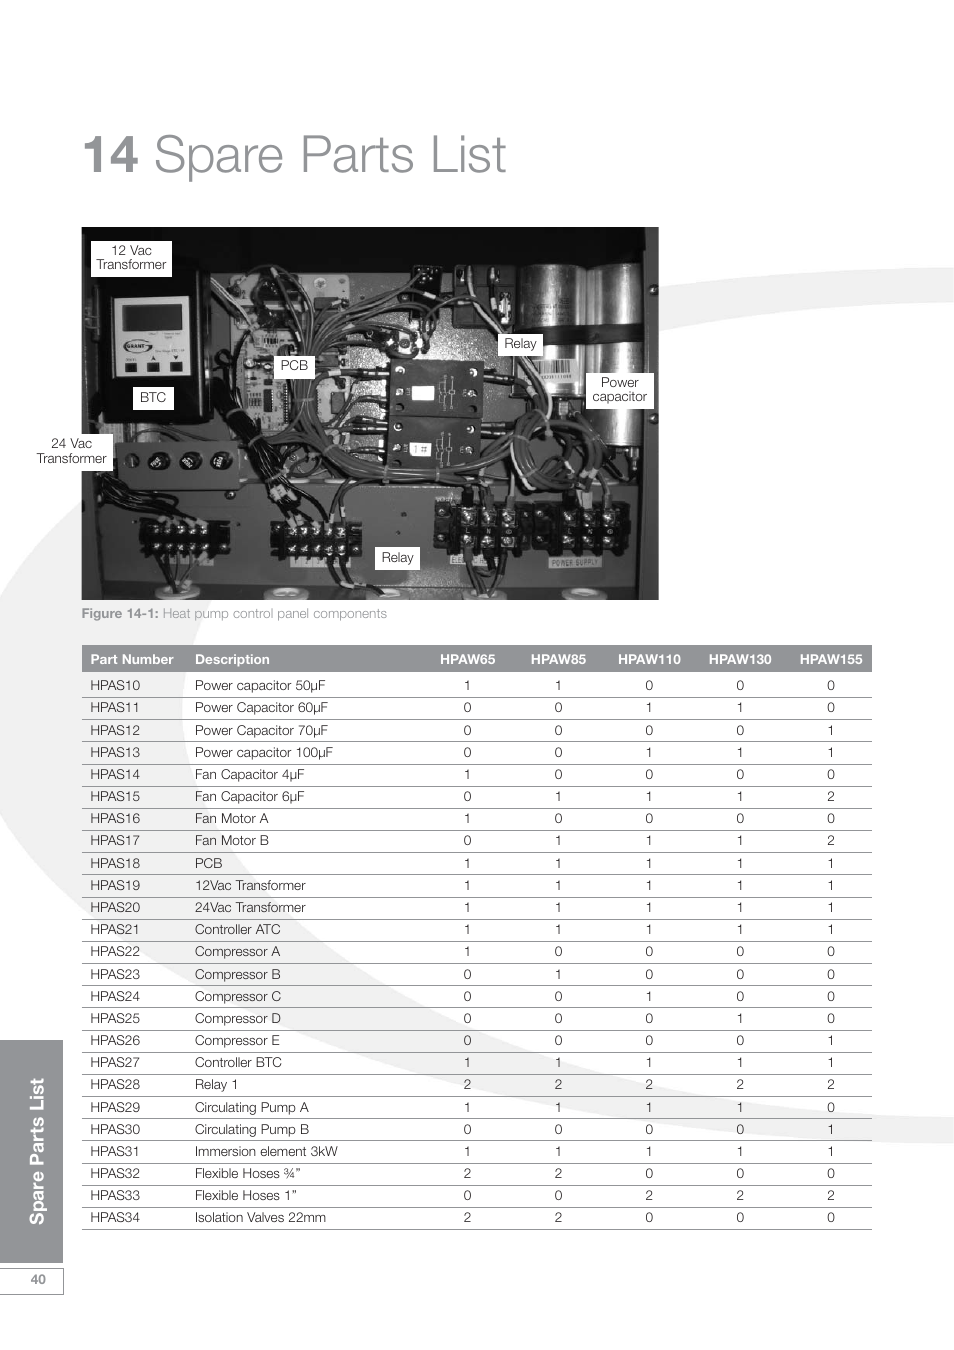 14 spare parts list, Spar e parts list | Grant Products HPAW155 User Manual | Page 44 / 50